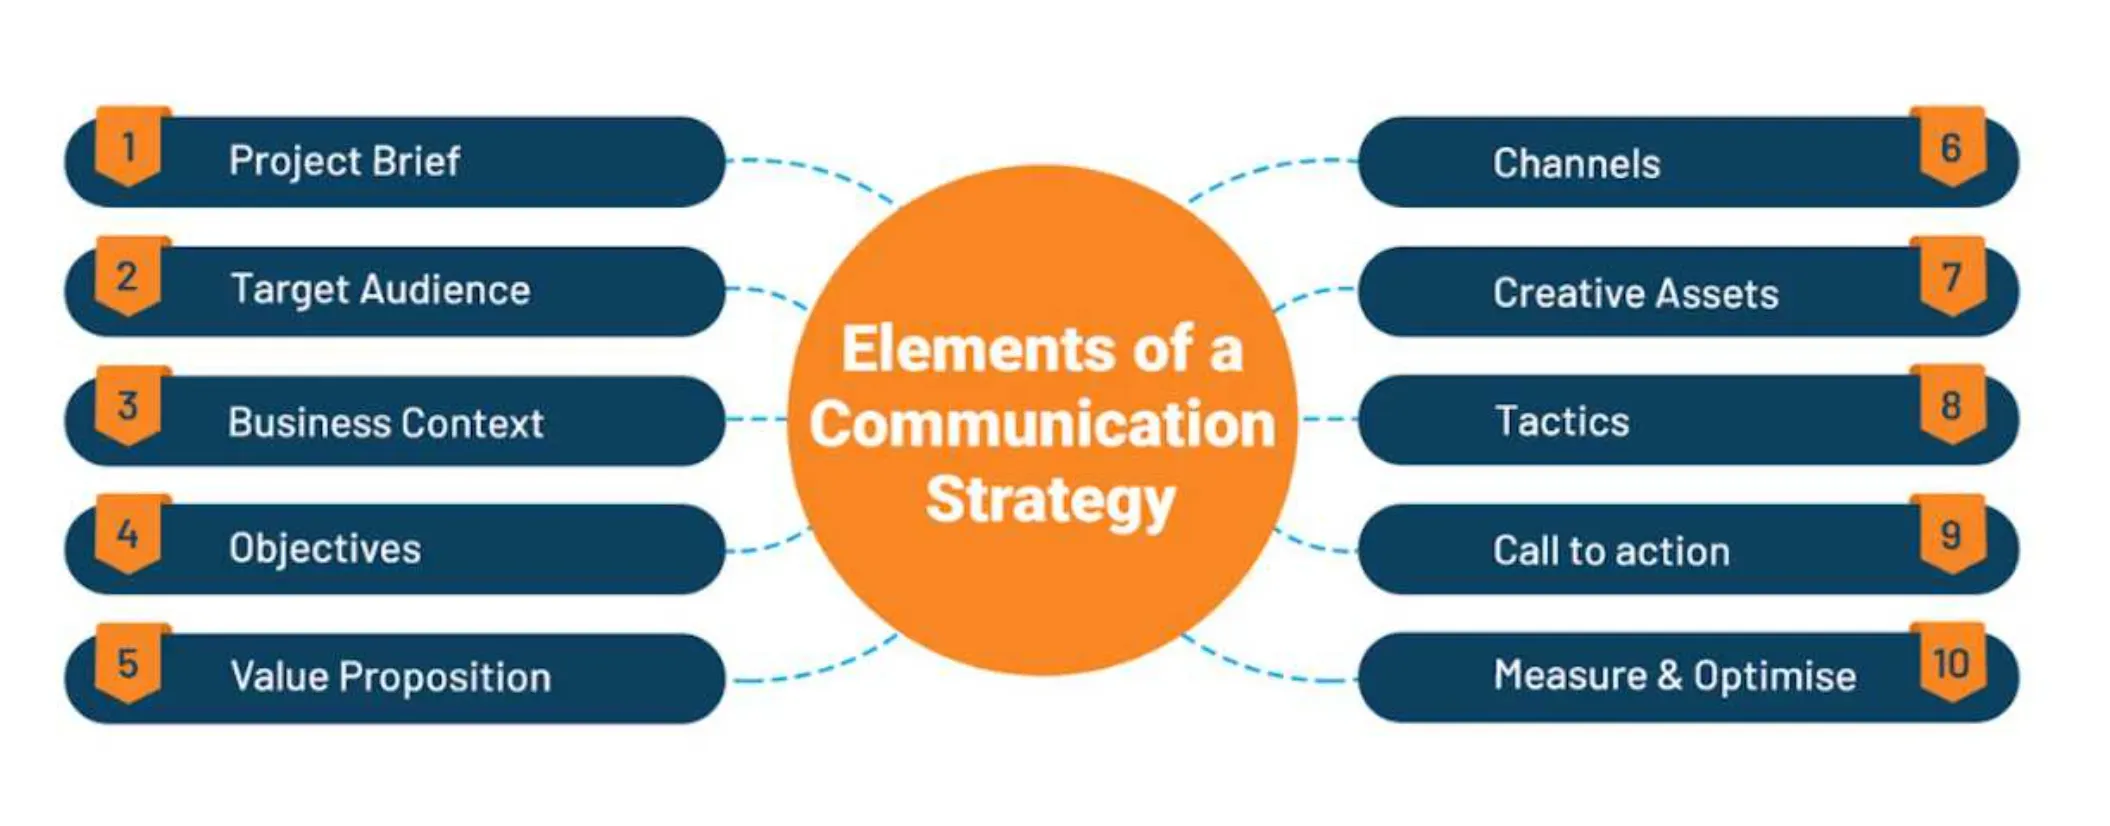 Differences in Communication Strategy